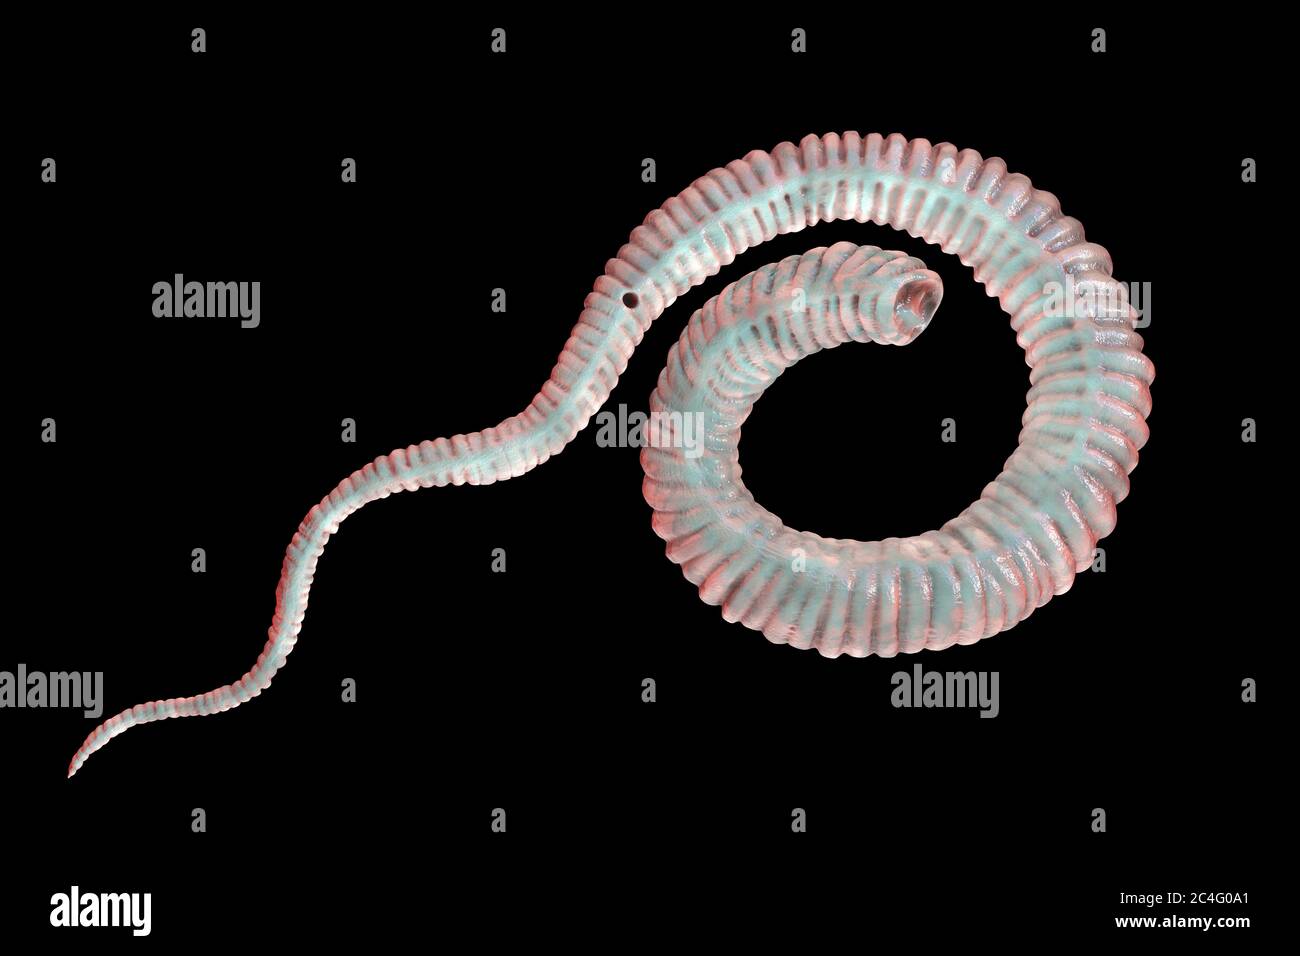 Guinea worm (Dracunculus medinensis) first-stage larva, computer illustration. Larvae are excreted from female worm parasitising under the skin of human extremities in patient's with dracunculiasis. Stock Photo